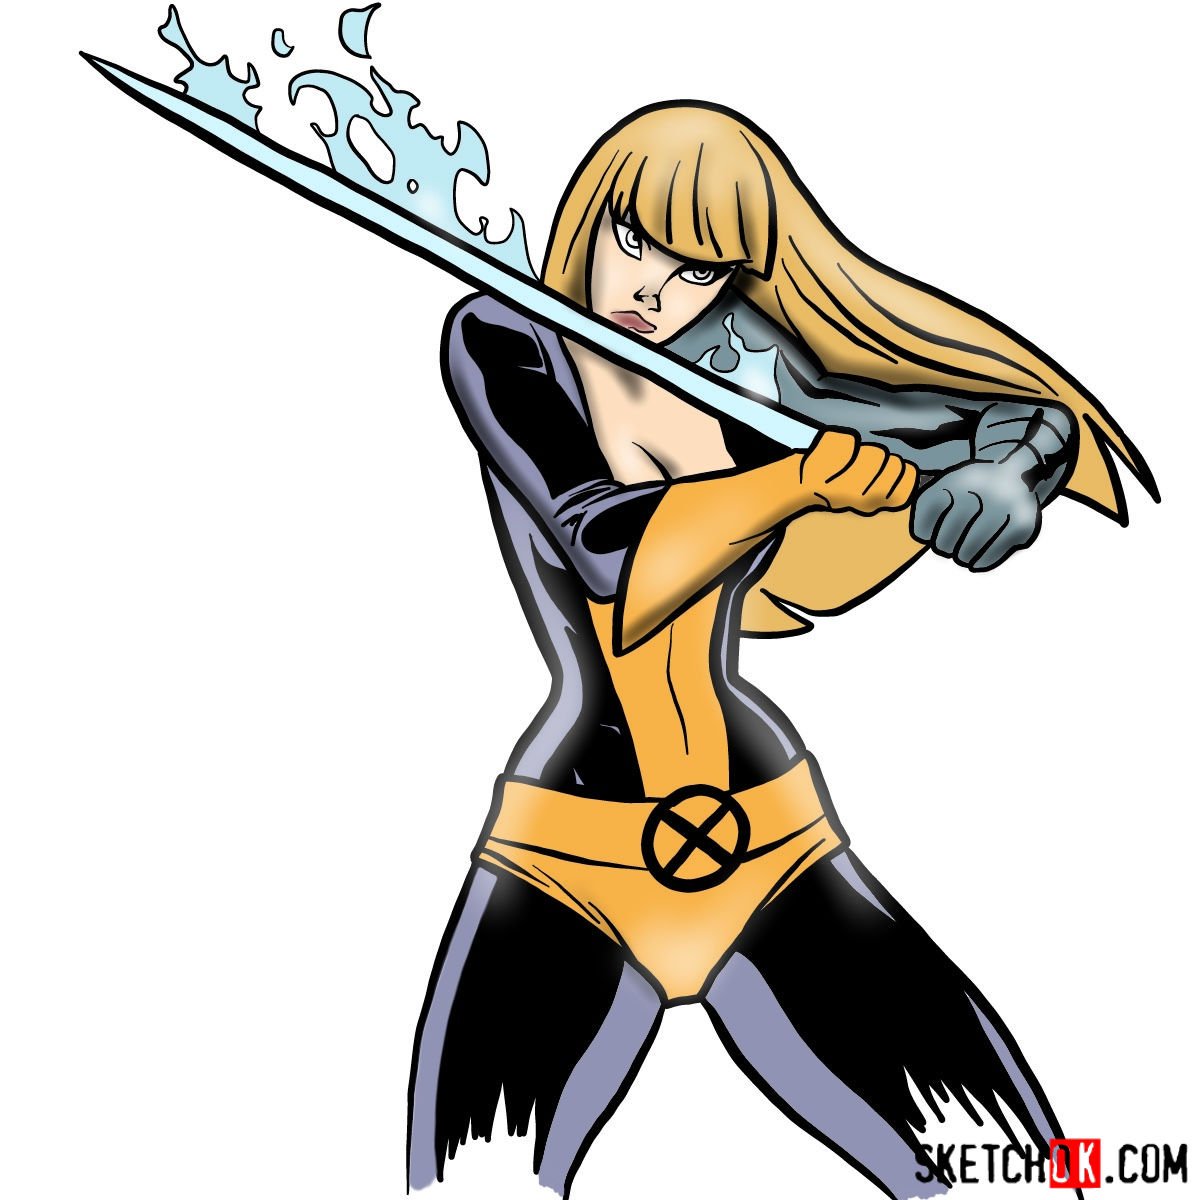 How to draw Magik, a mutant from X-Men